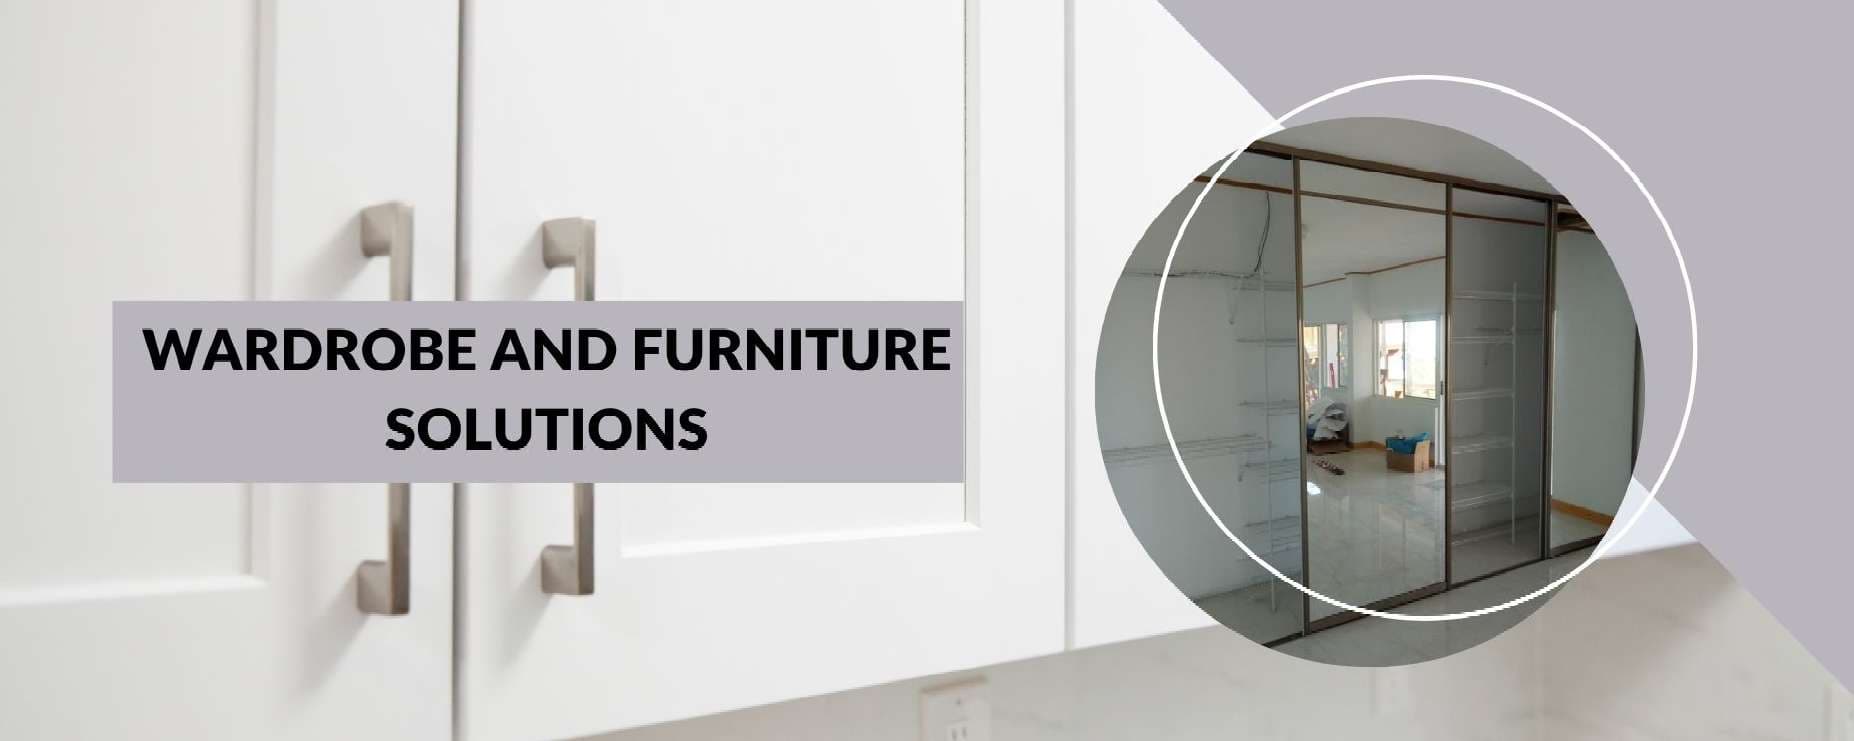 Wardrobe and Furniture Solutions